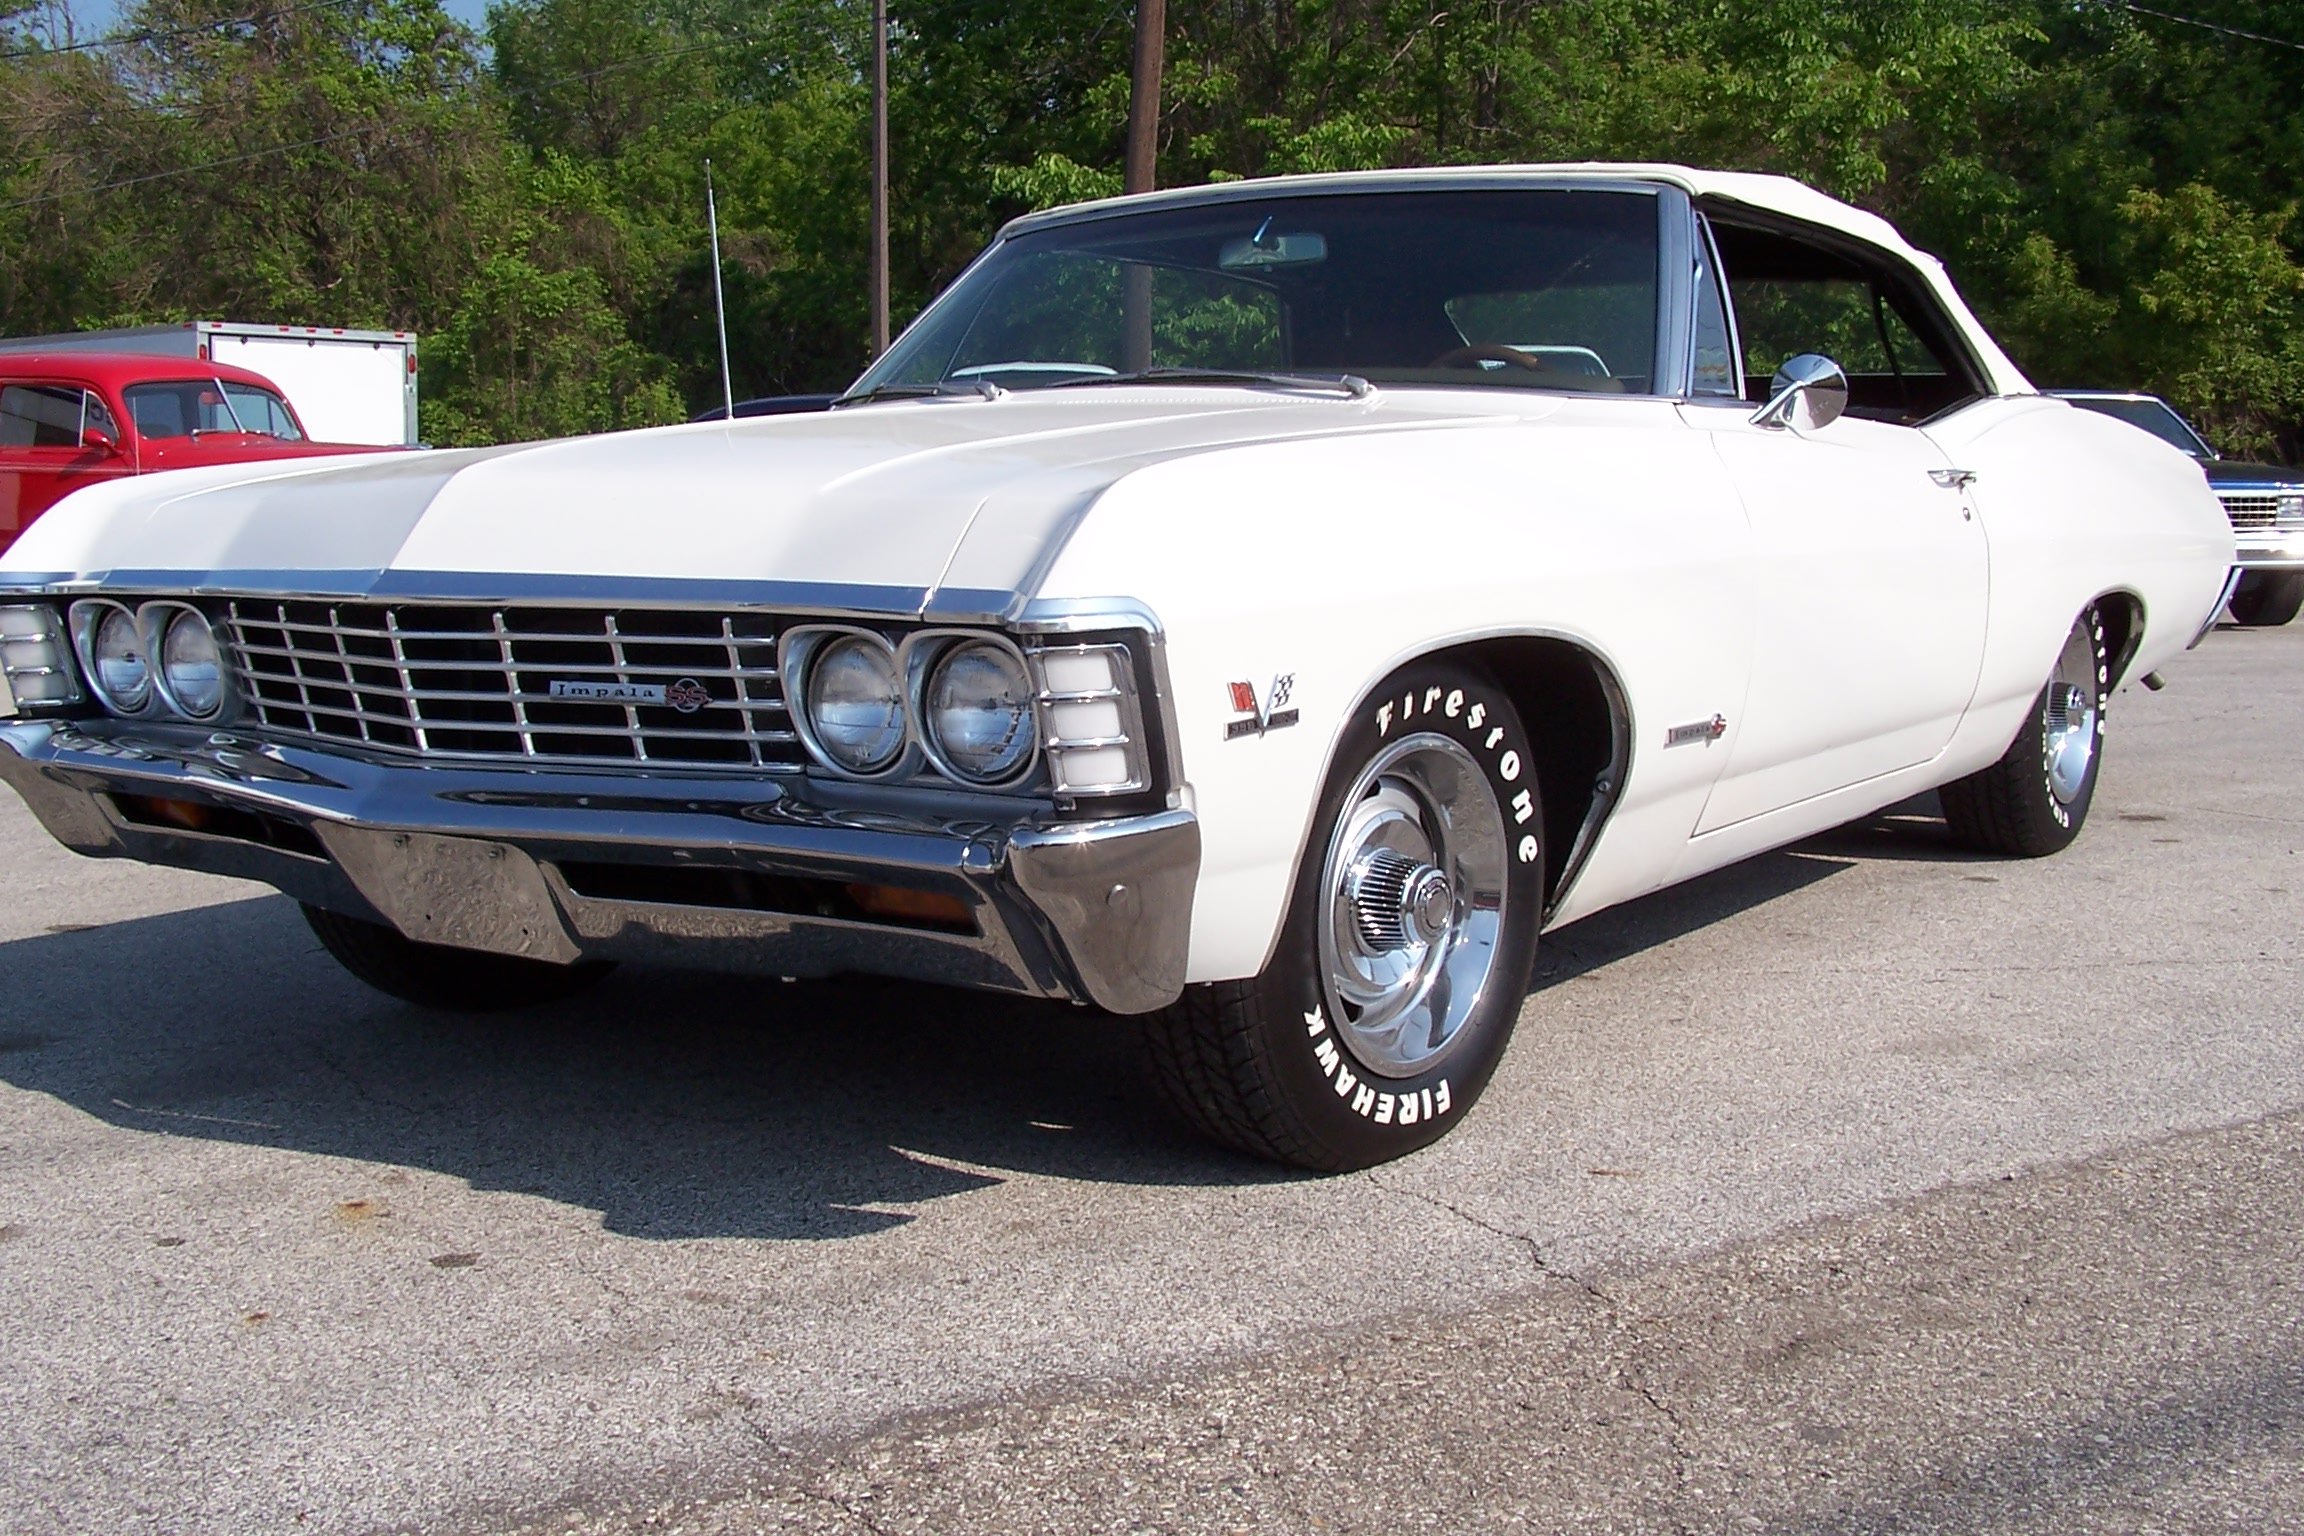 1967, Chevrolet, Impala, Ss, Convertible, Muscle, Classic